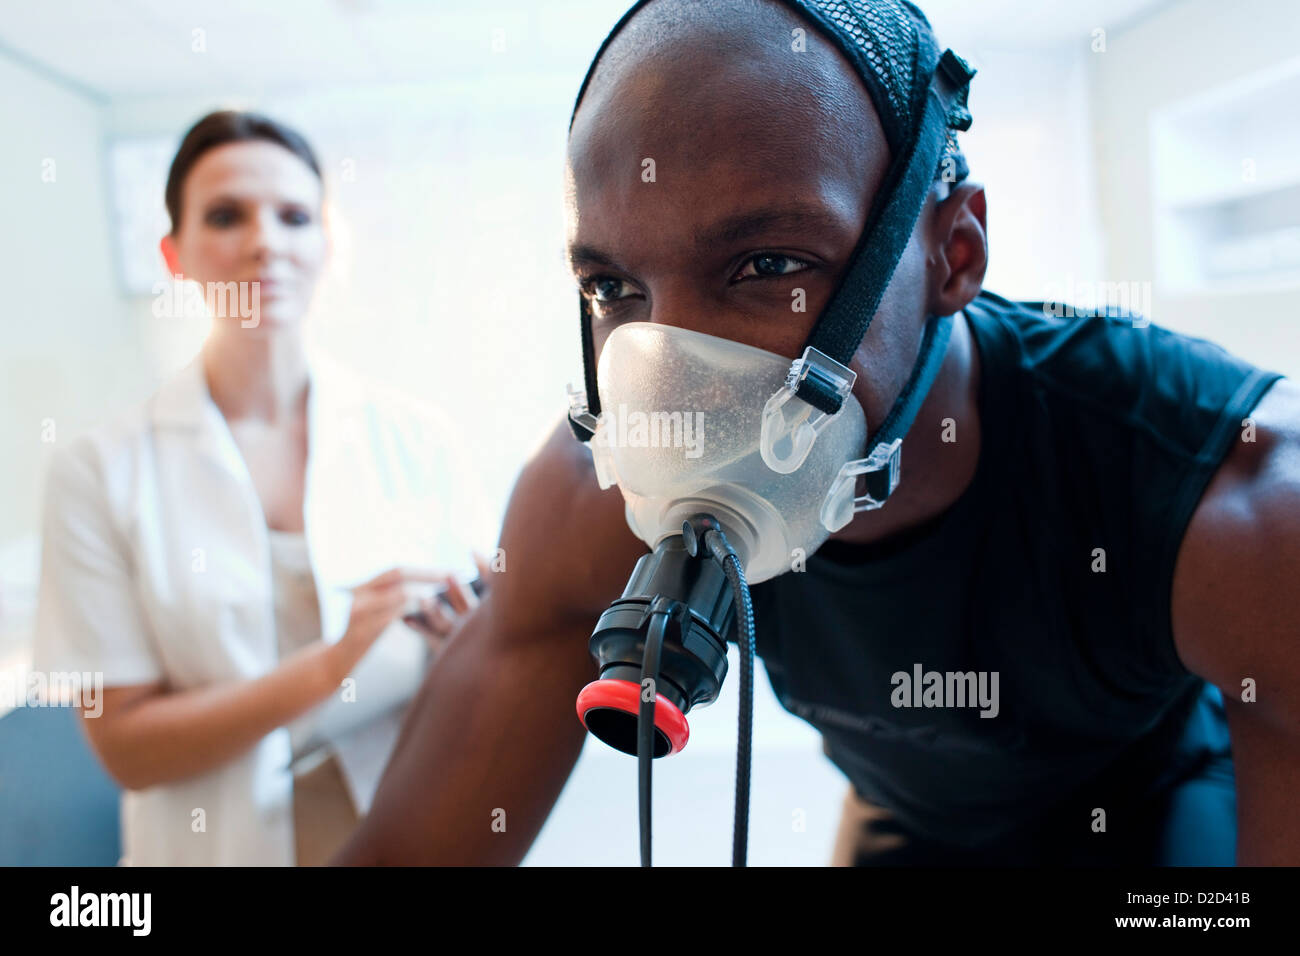 MODEL RELEASED Performance testing Athlete riding an exercise bike while his performance and oxygen consumption are measured Stock Photo